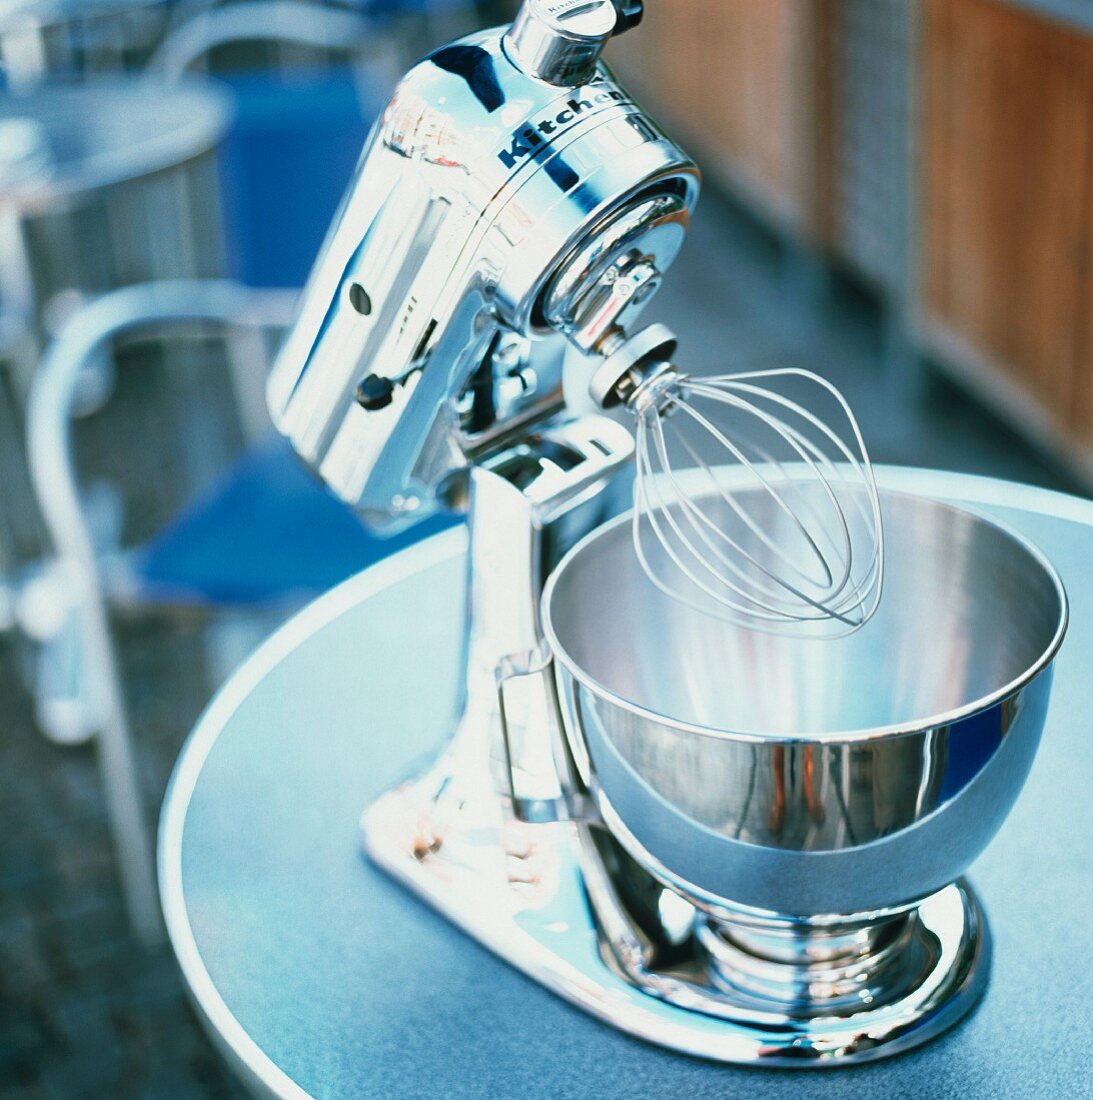 A Stainless Steel Mixer